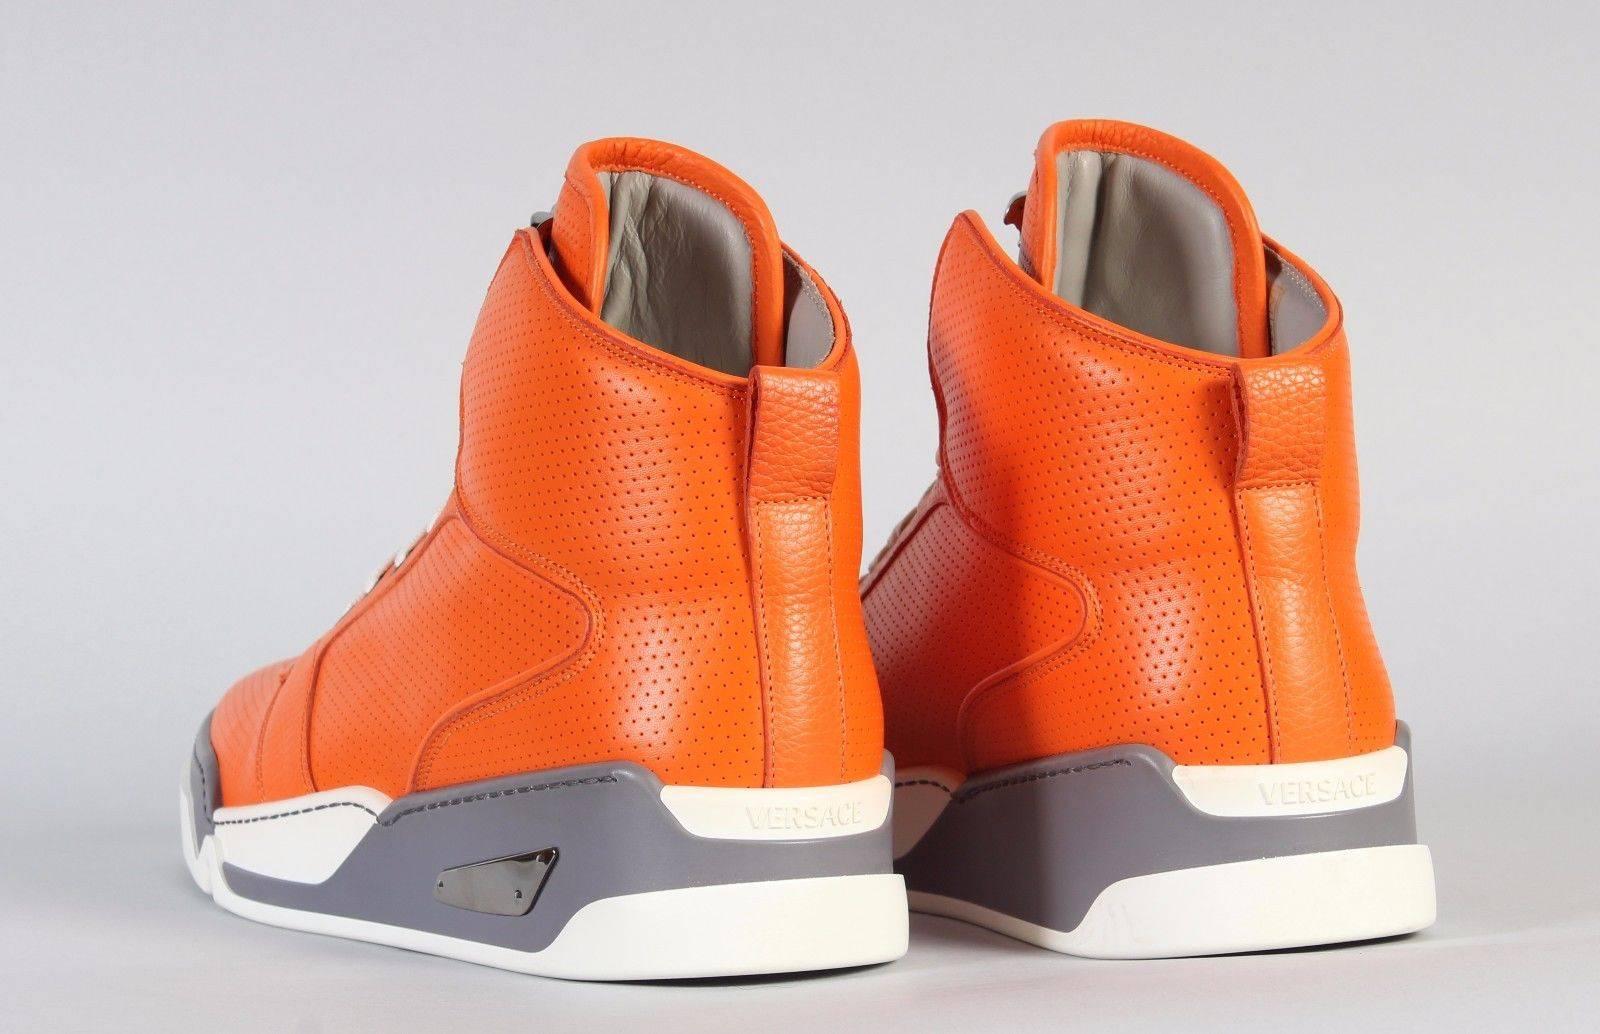 New Versace Men's Orange Perforated Leather High-Top Sneakers  2